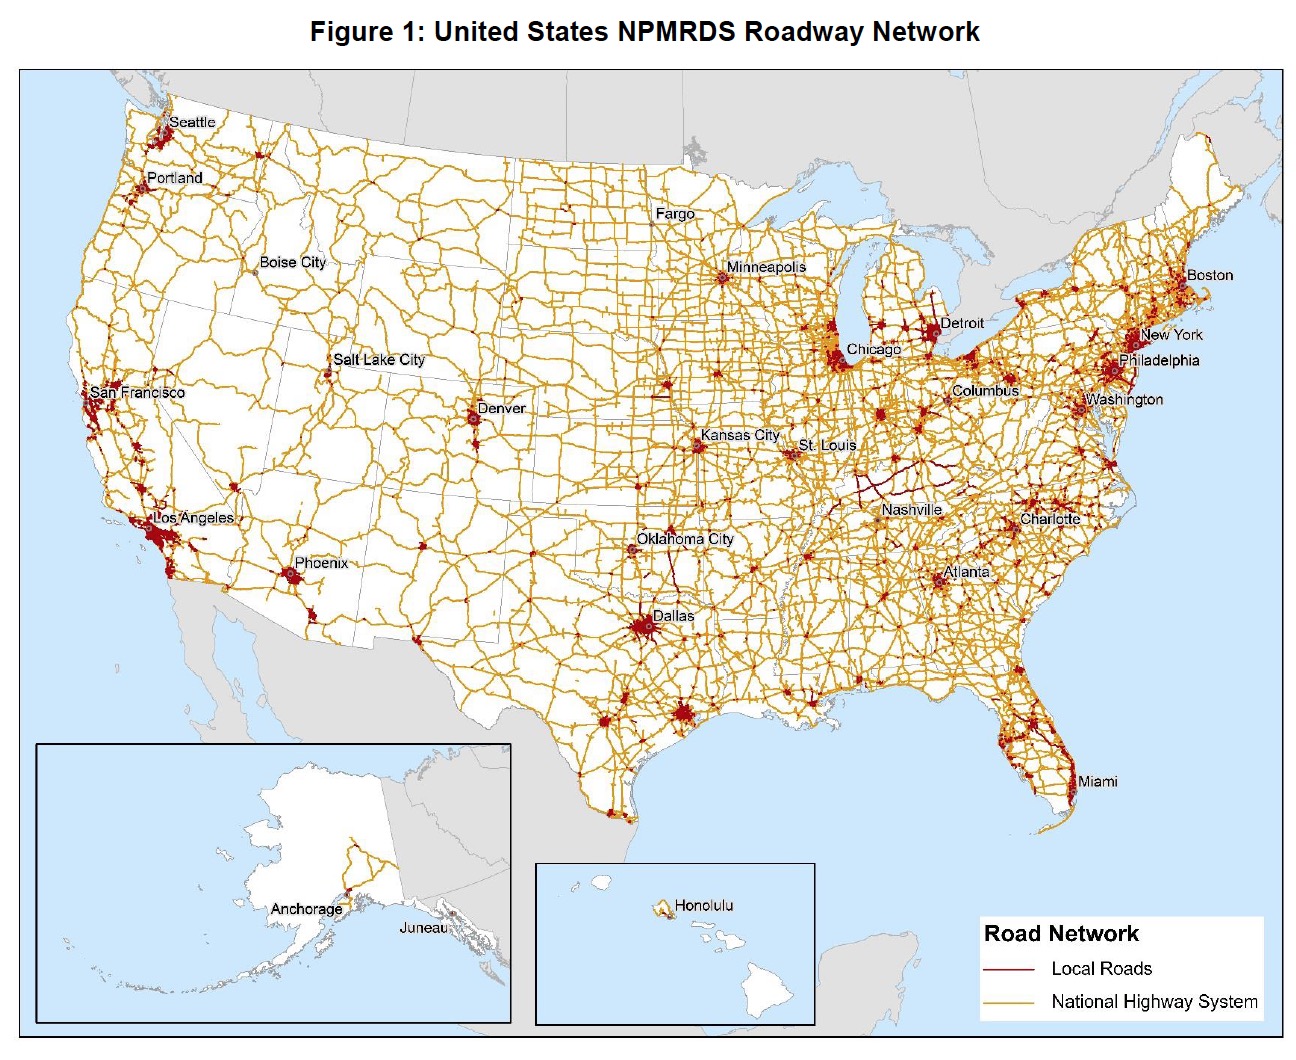 Figure 1: United States NPMRDS Roadway Network